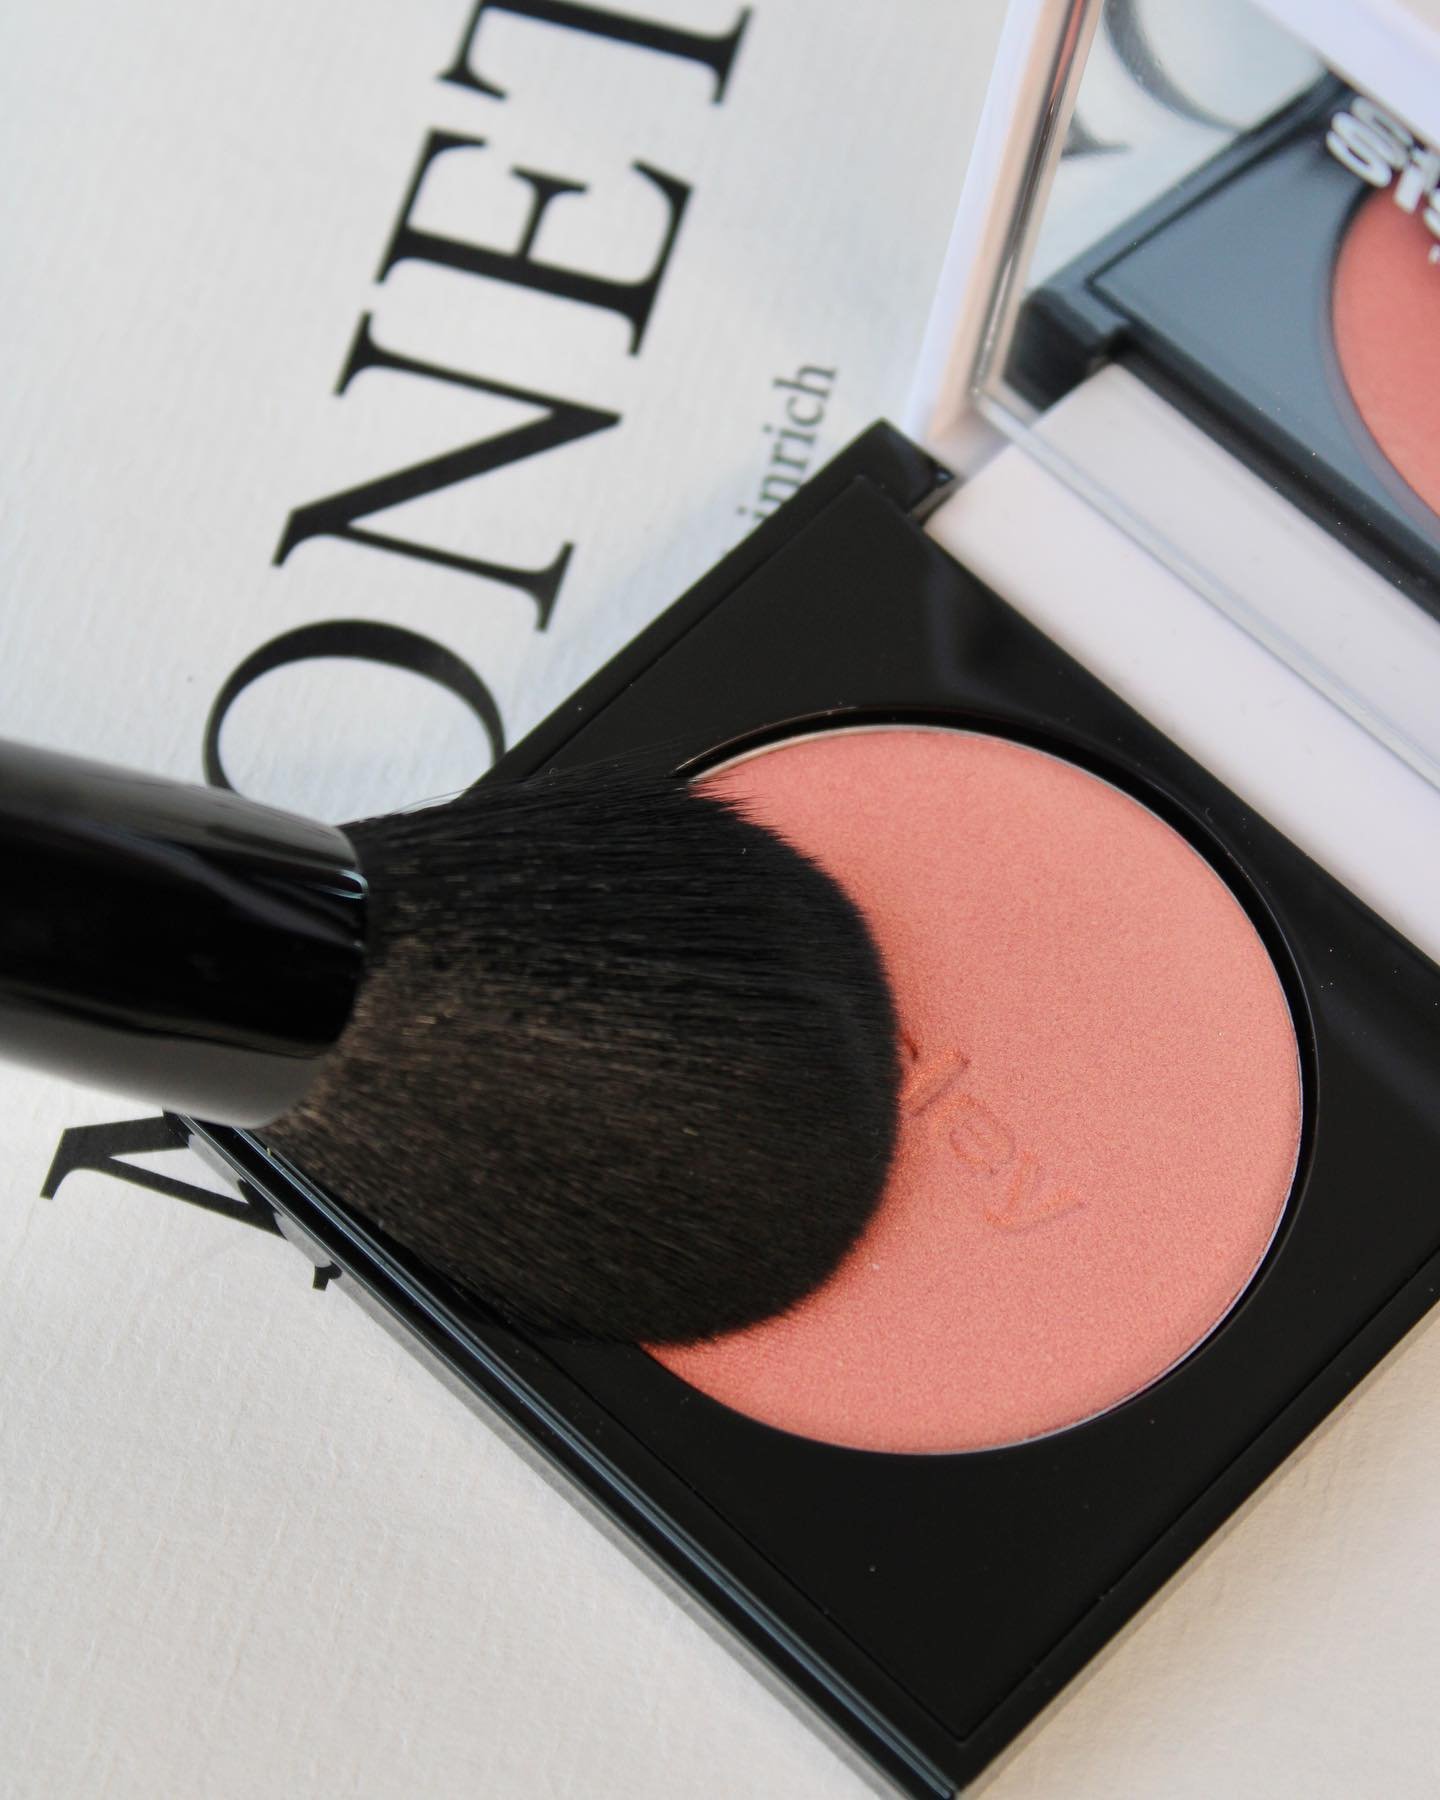 A luxury beauty brand offering makeup brushes for your favorite foundation  or translucent powder. Our makeup brushes are designed to create seamless  finish each time. Brushes perfect for blending cream blush, eyebrows